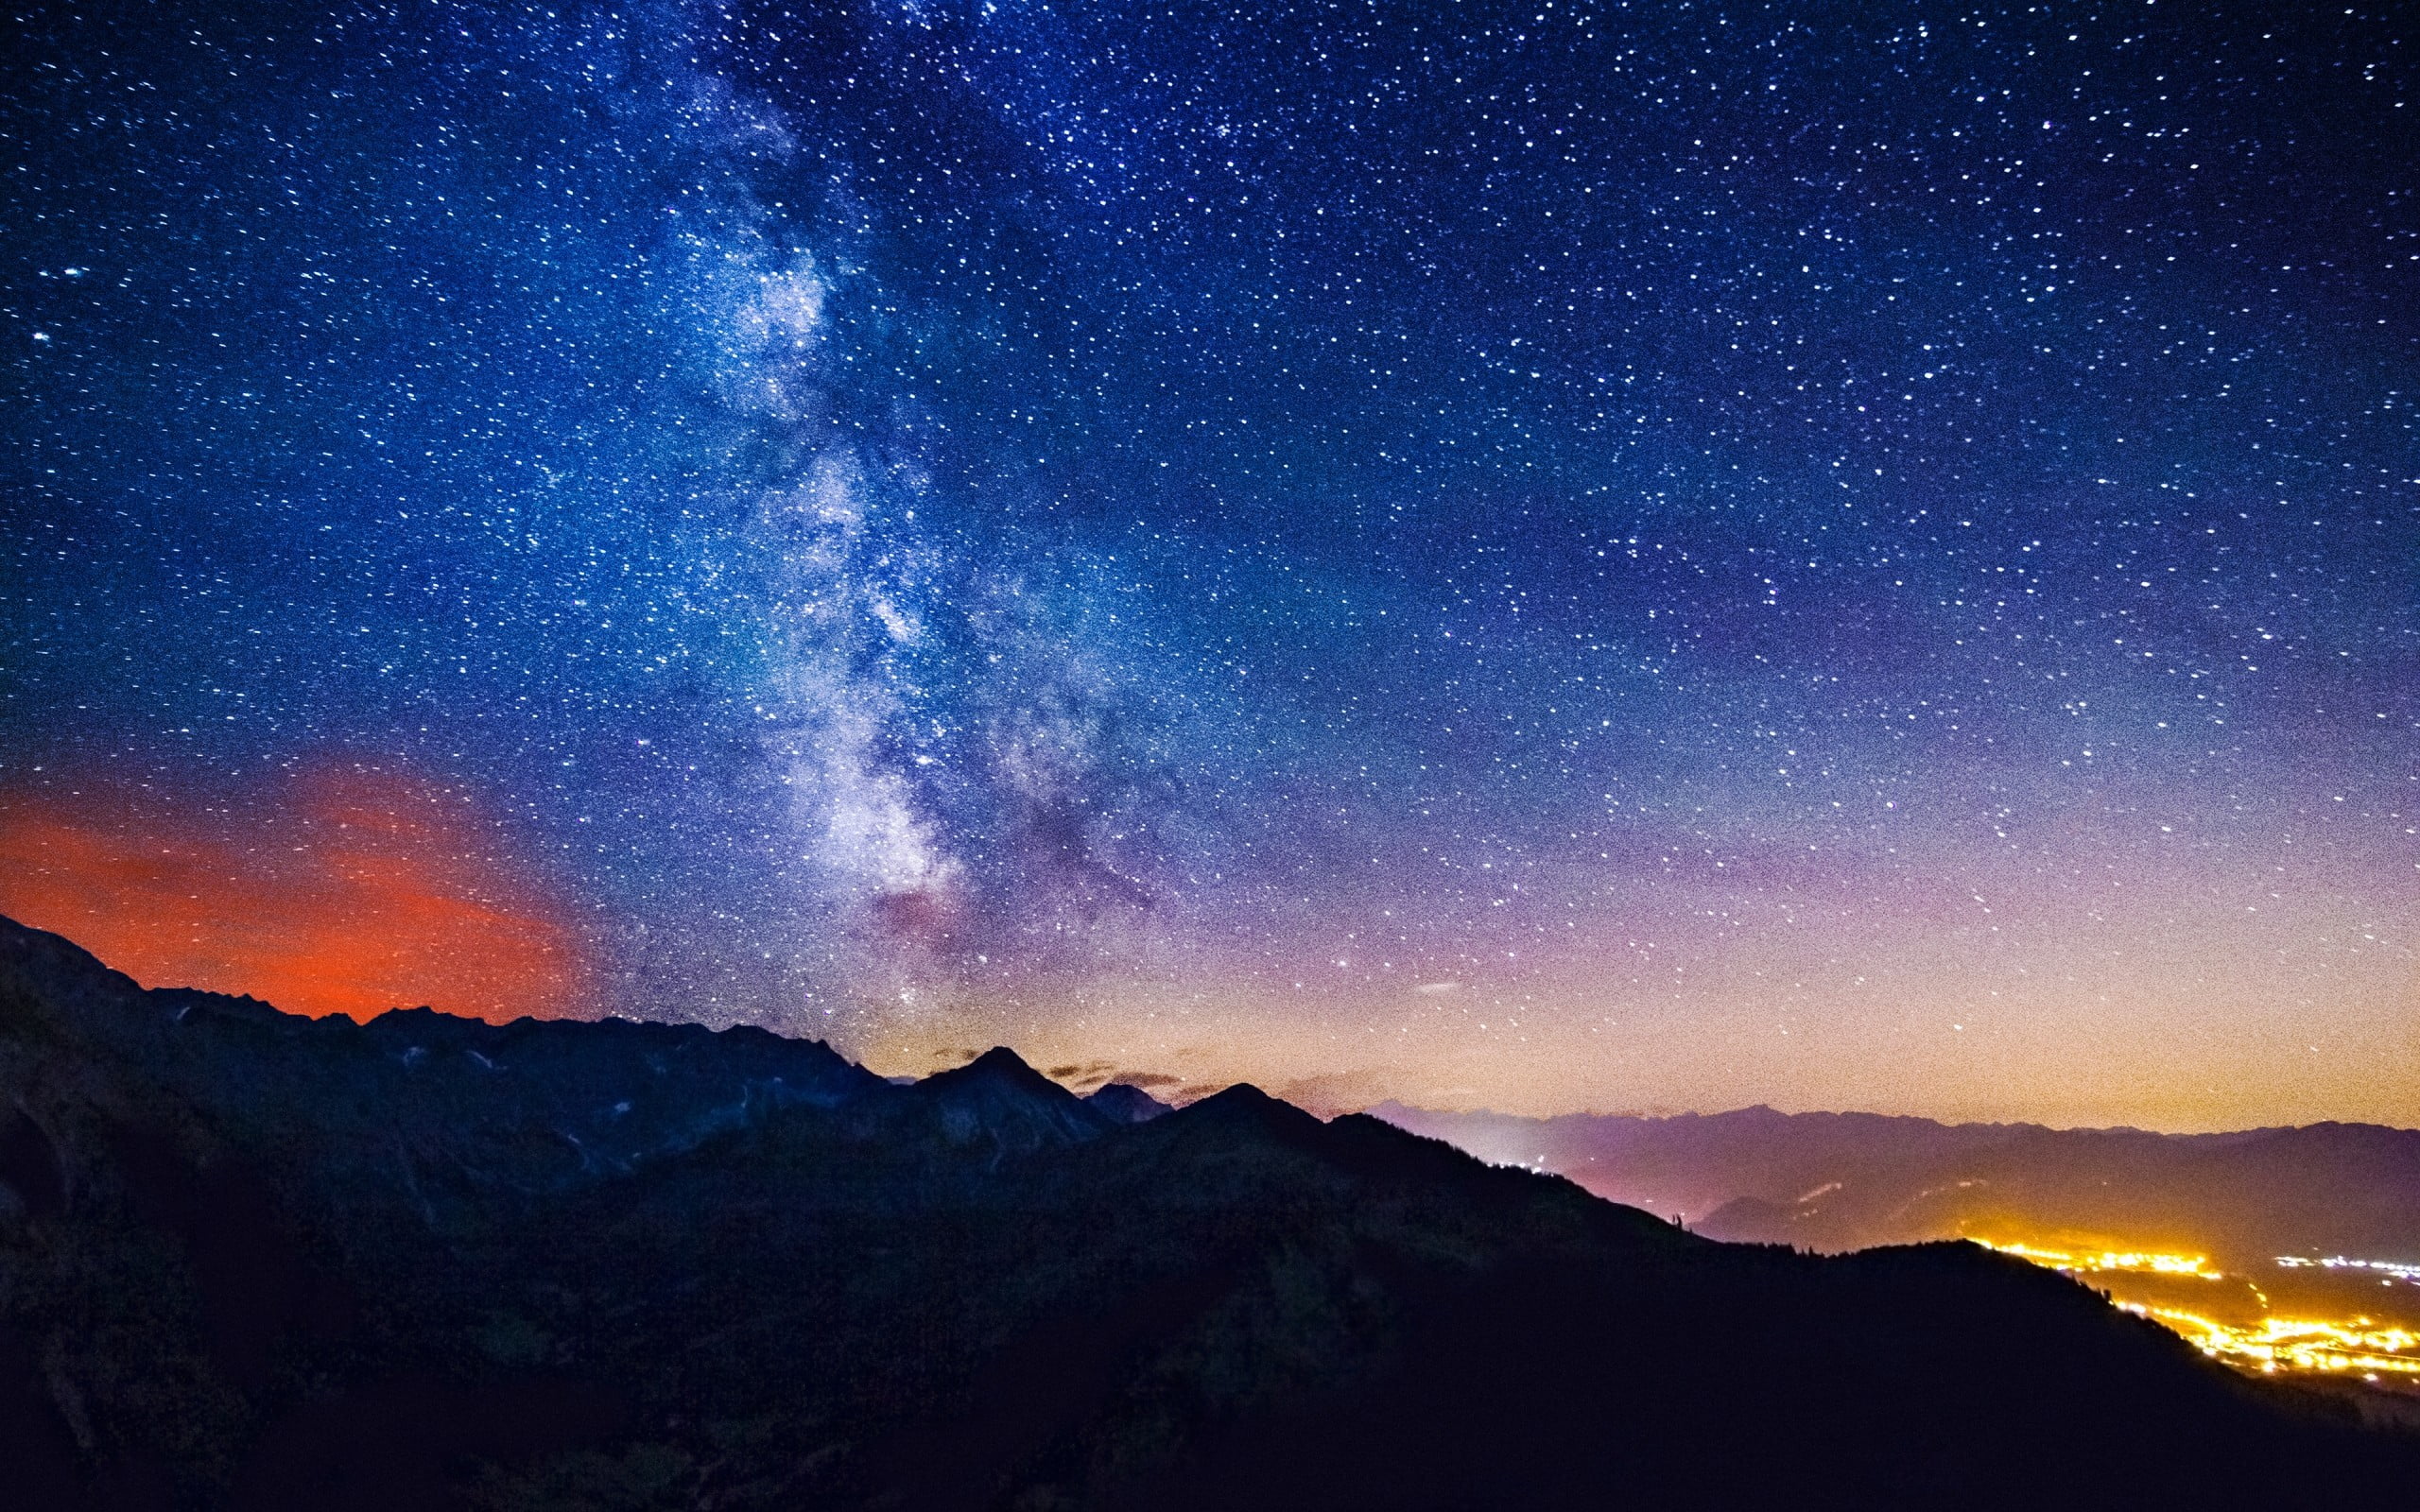 Silhouette of mountains under clear sky full of stars, landscape